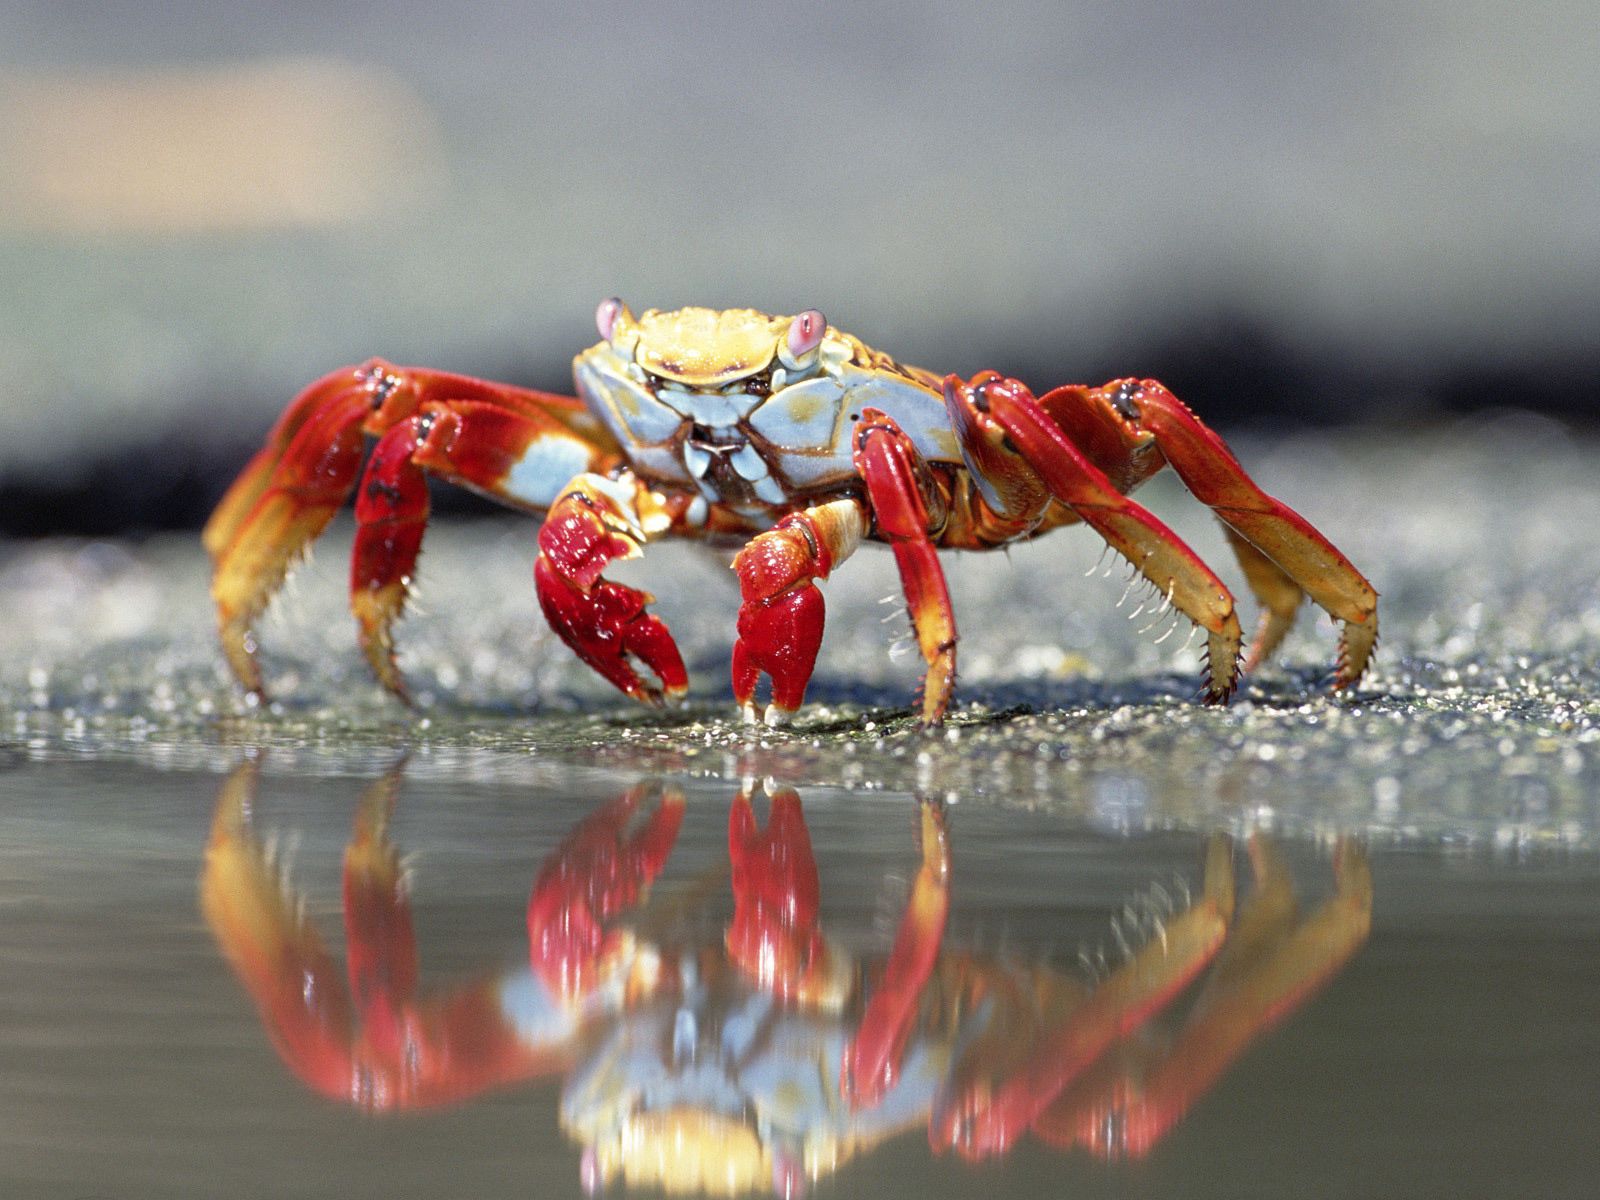 Best Crab Background for mobile